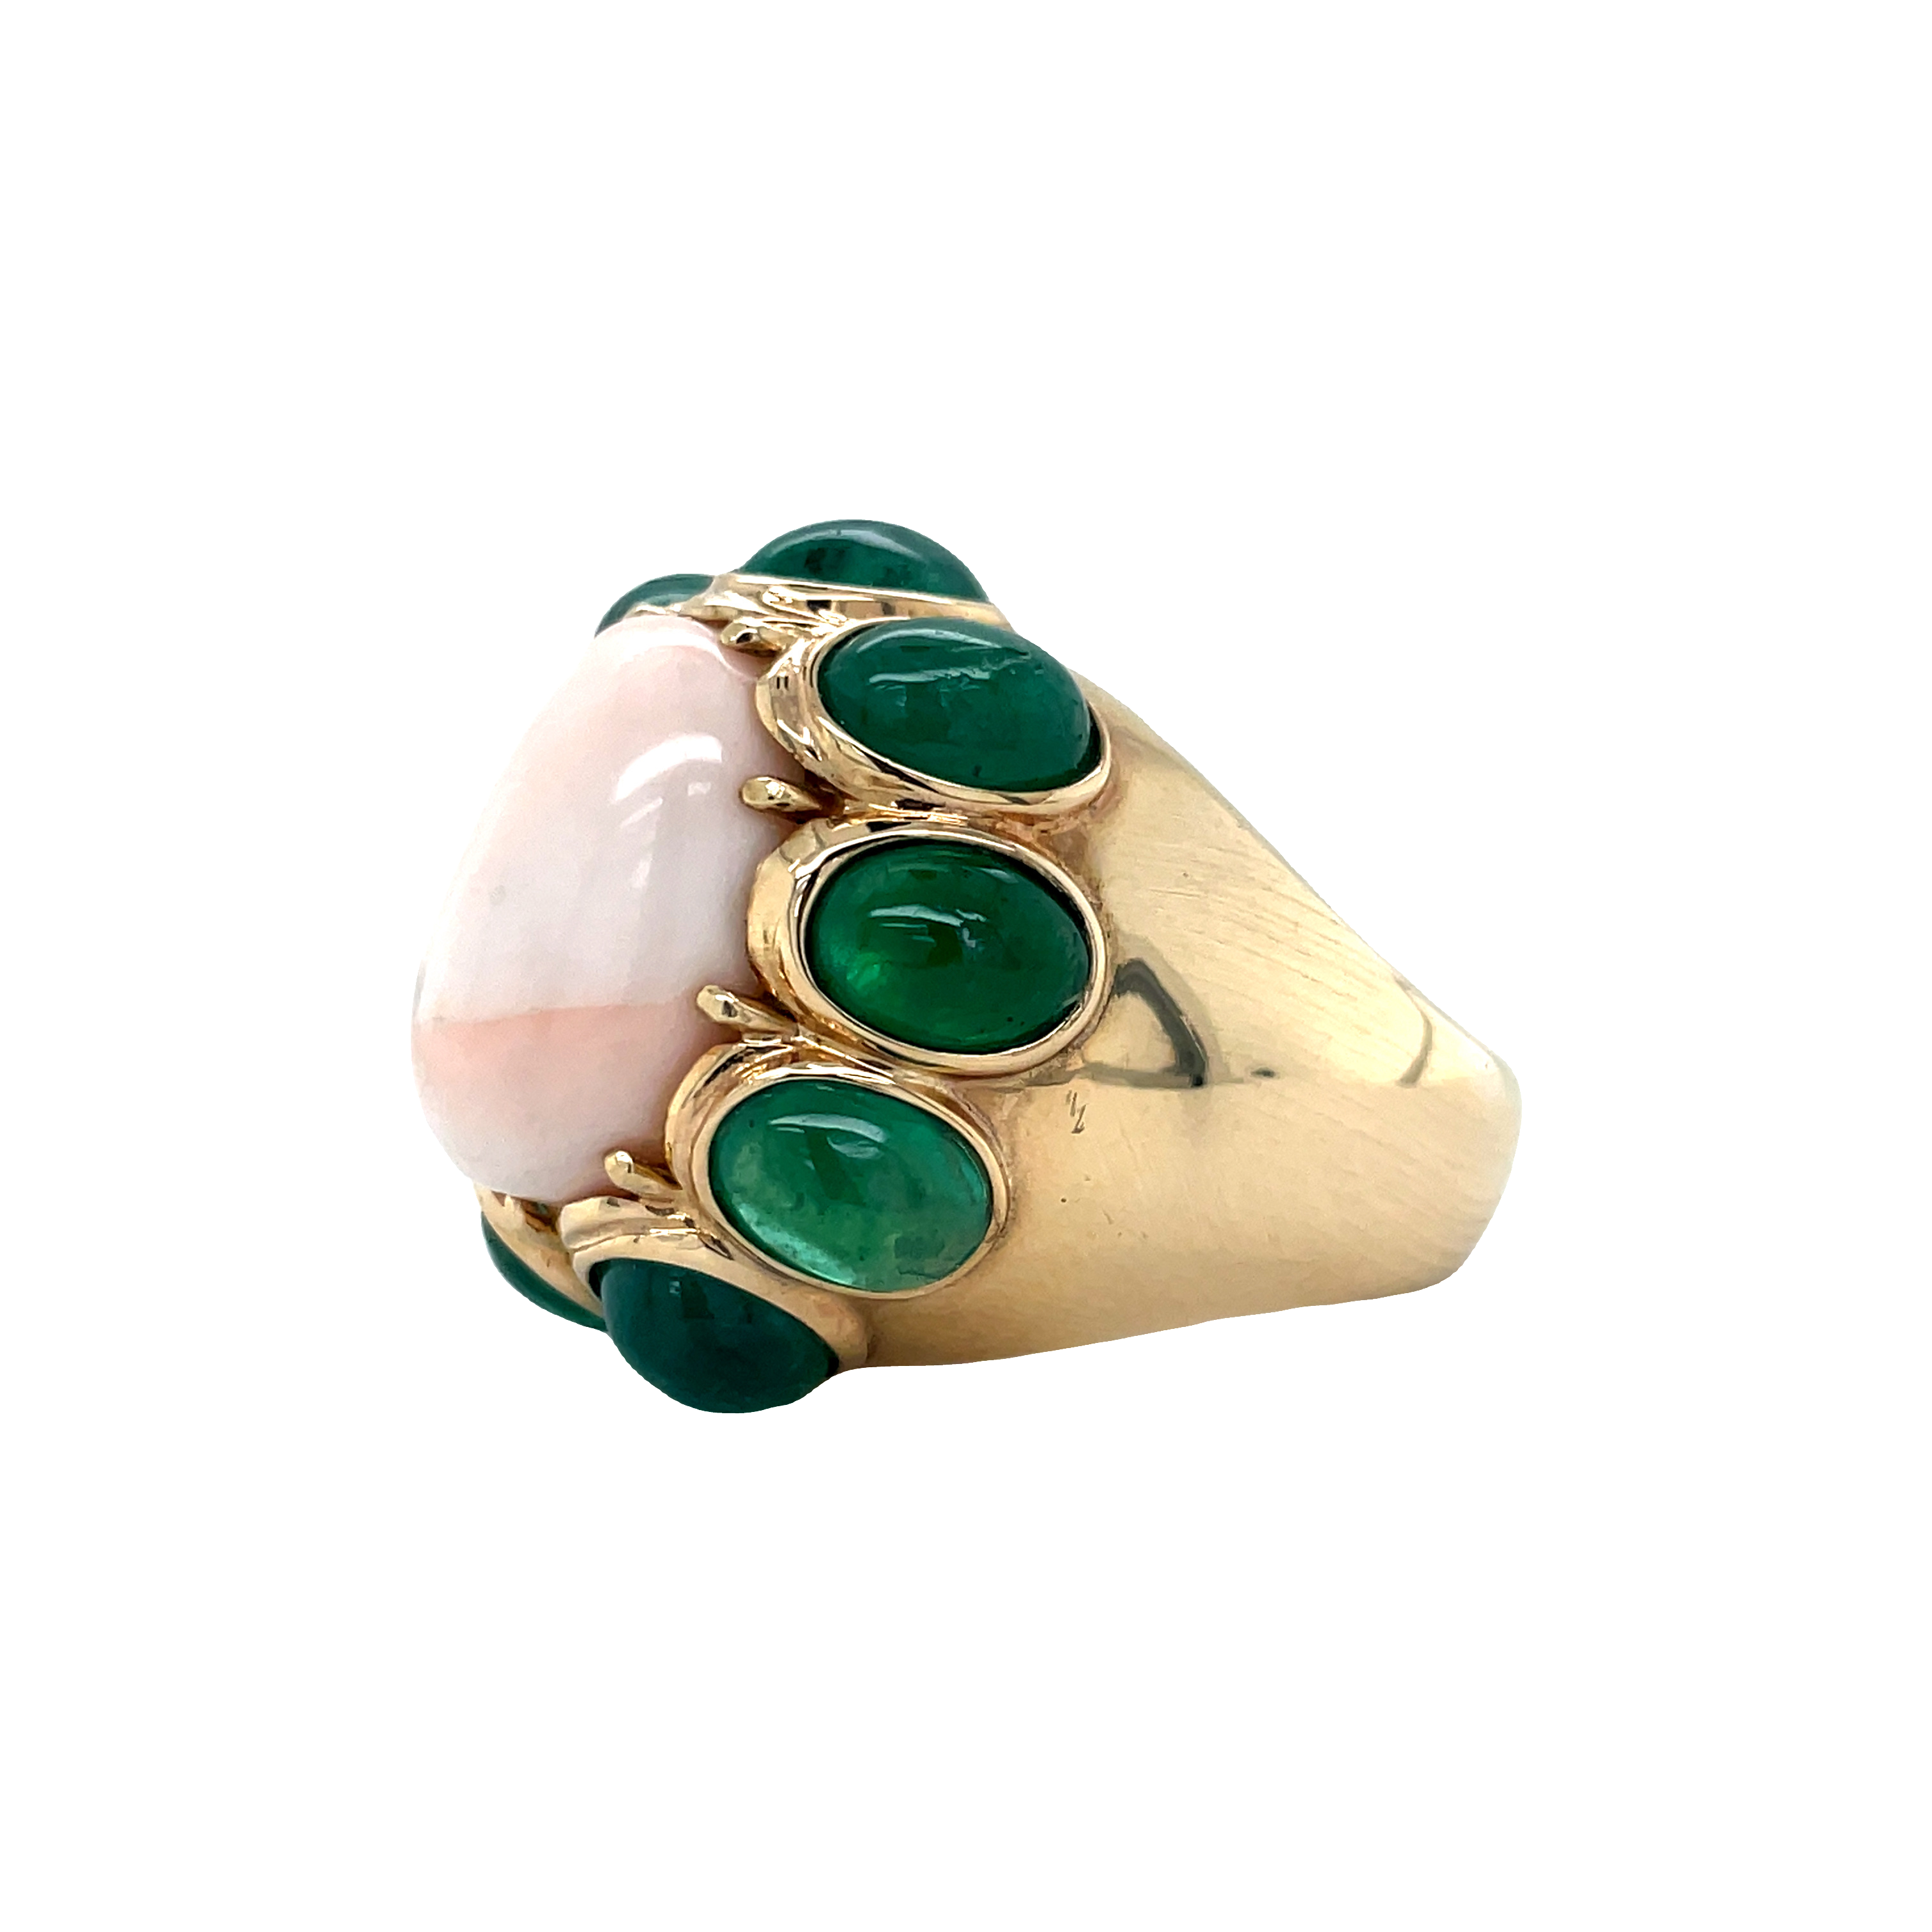 This 14k yellow gold antique ring is a stunning example of estate jewelry, with an angel skin coral cabochon measuring 23.00 mm surrounded by nine large emerald cabochons. Its great condition will make it a timeless piece you can treasure for years to come.